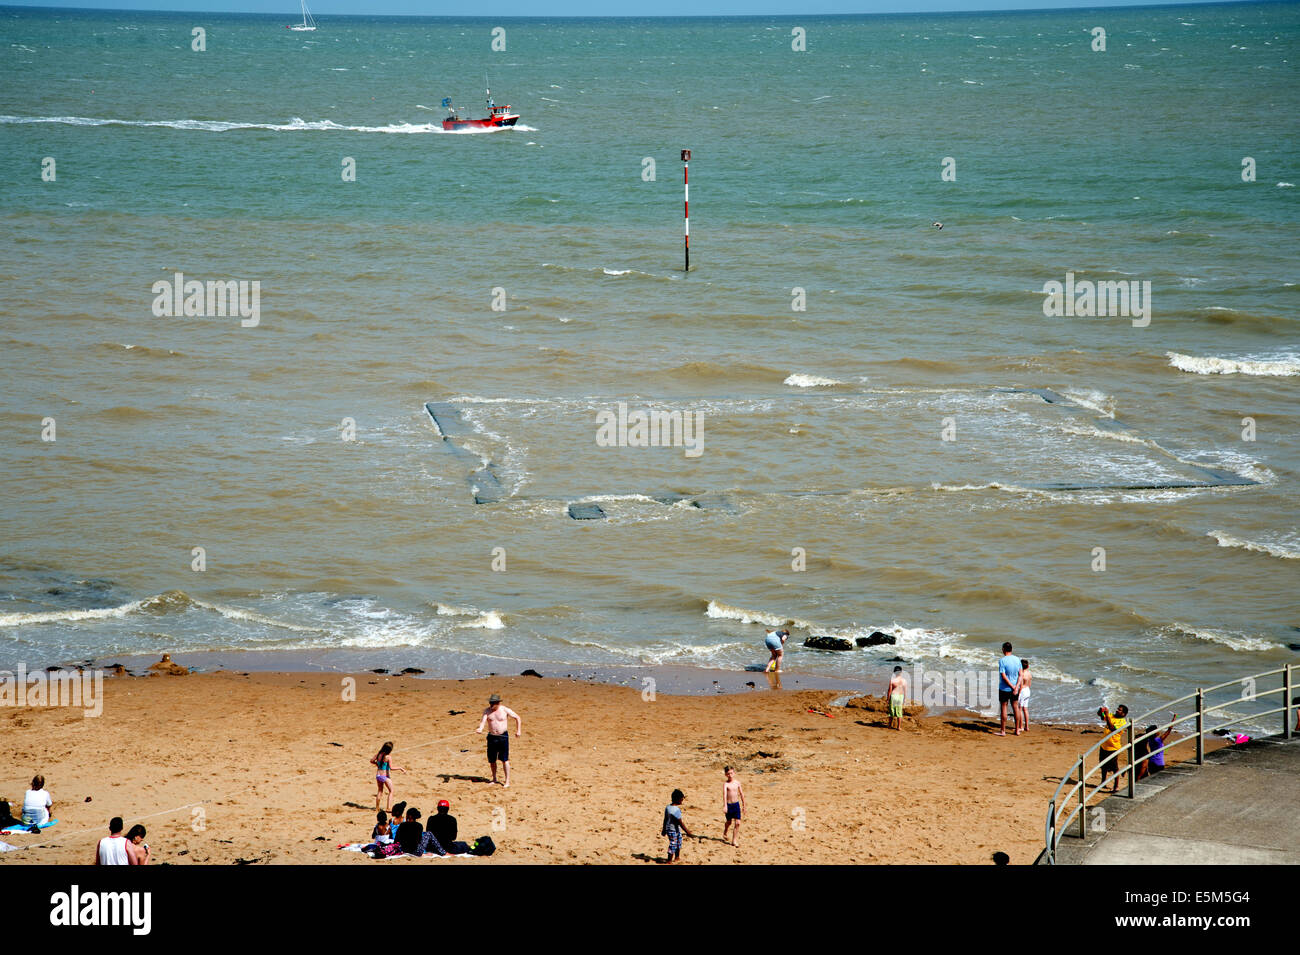 Broadstairs, Kent. Submerged sea swimming pool with people on the beach Stock Photo